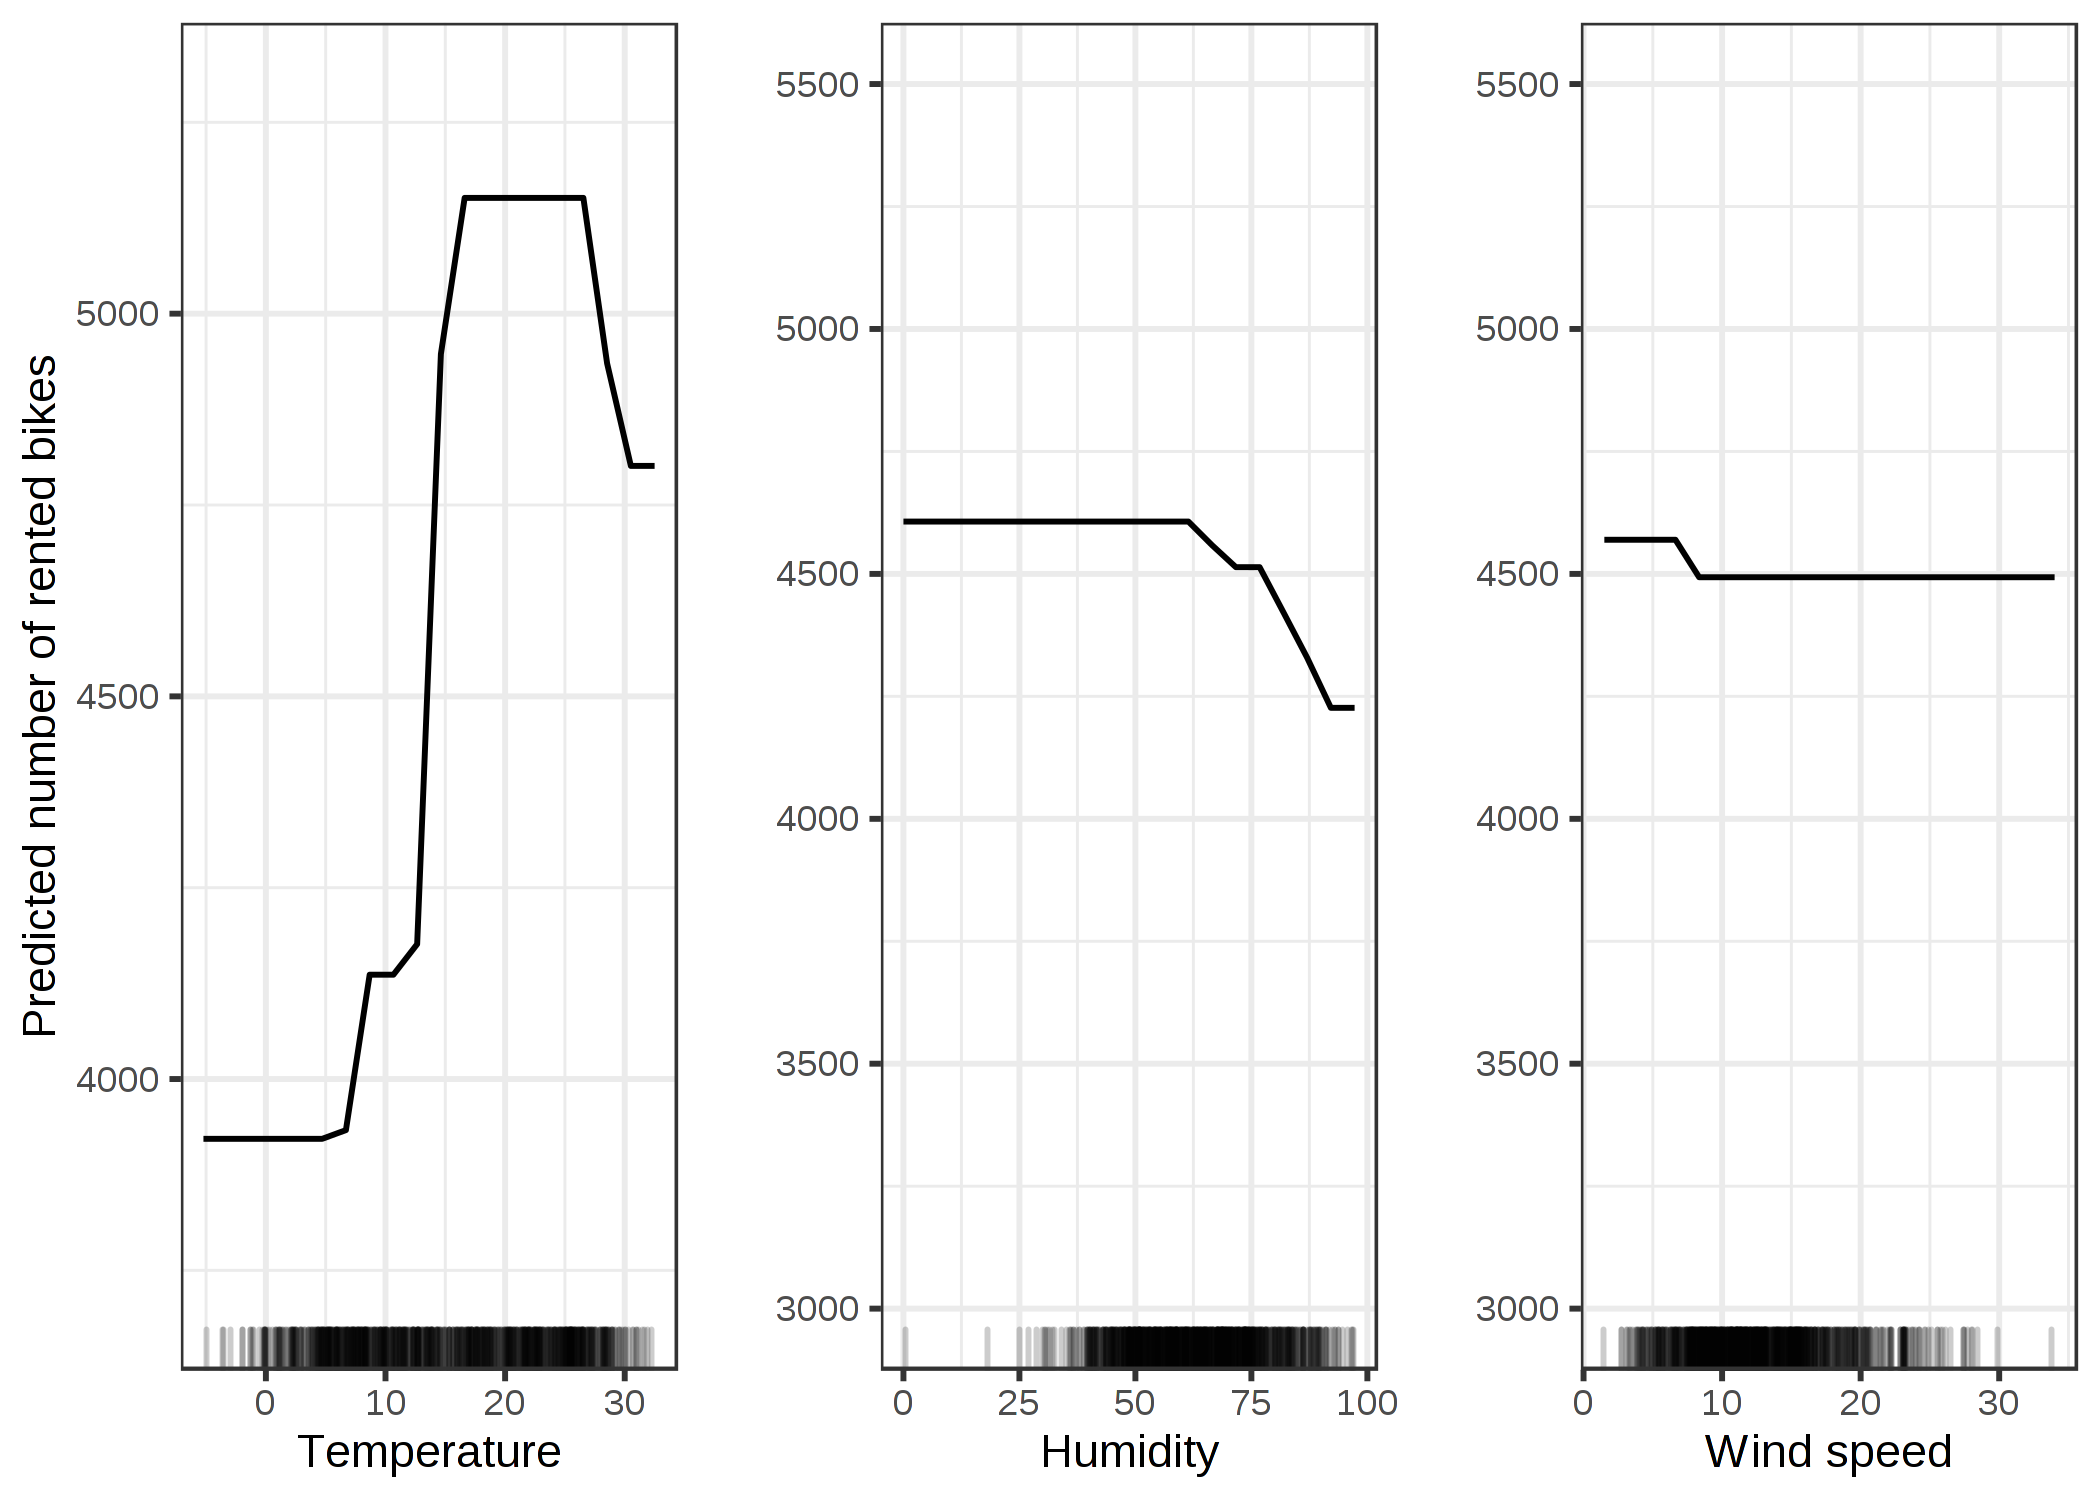 PDPs for temperature, humidity and wind speed. Compared to the ALE plots, the PDPs show a smaller decrease in predicted number of bikes for high temperature or high humidity. The PDP uses all data instances to calculate the effect of high temperatures, even if they are, for example, instances with the season "winter". The ALE plots are more reliable.